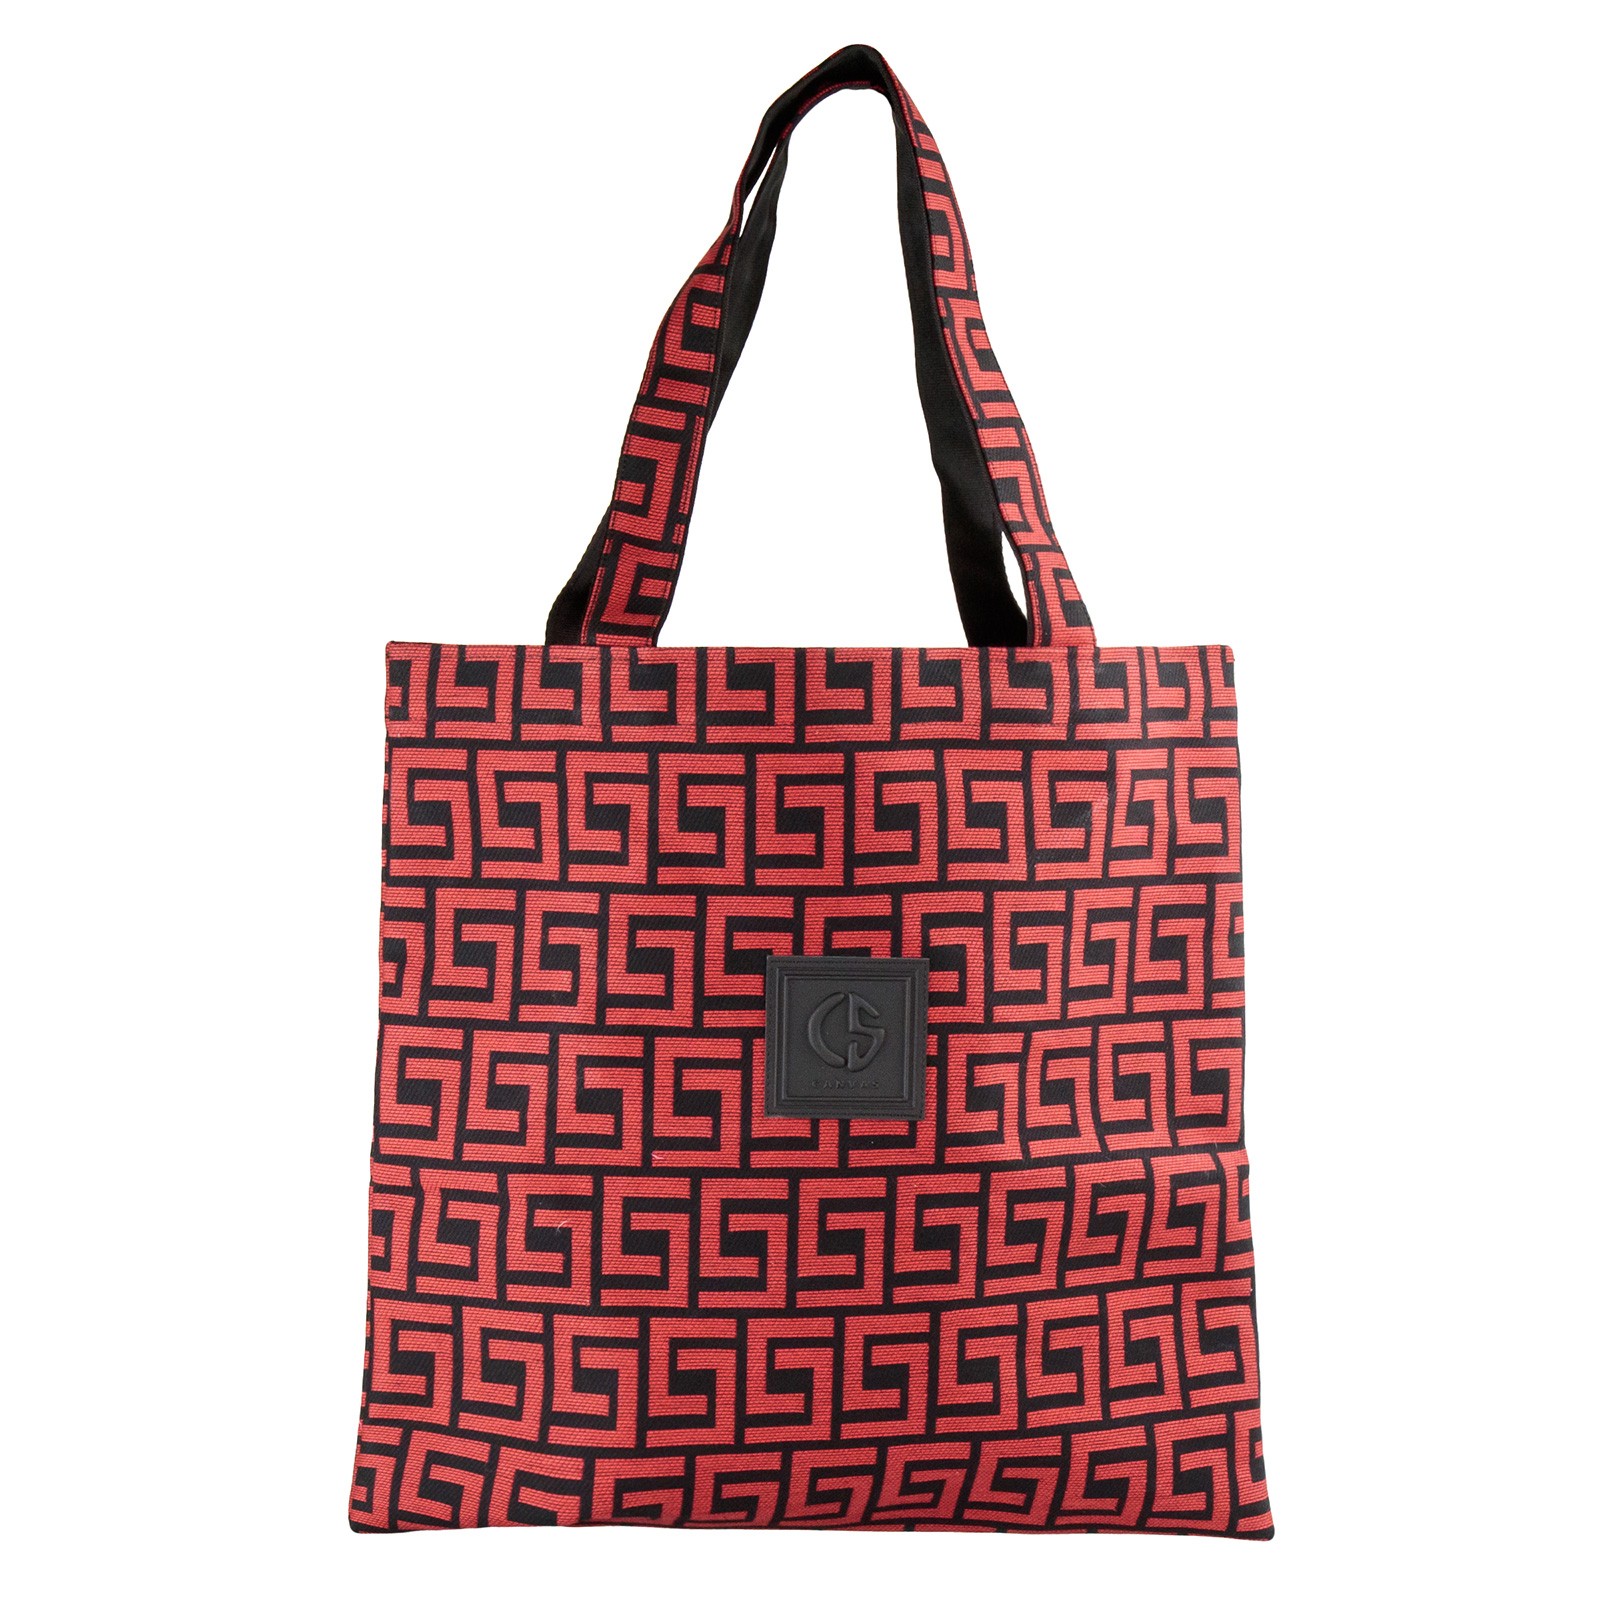 Canvas The Bags Veroniki Red Black